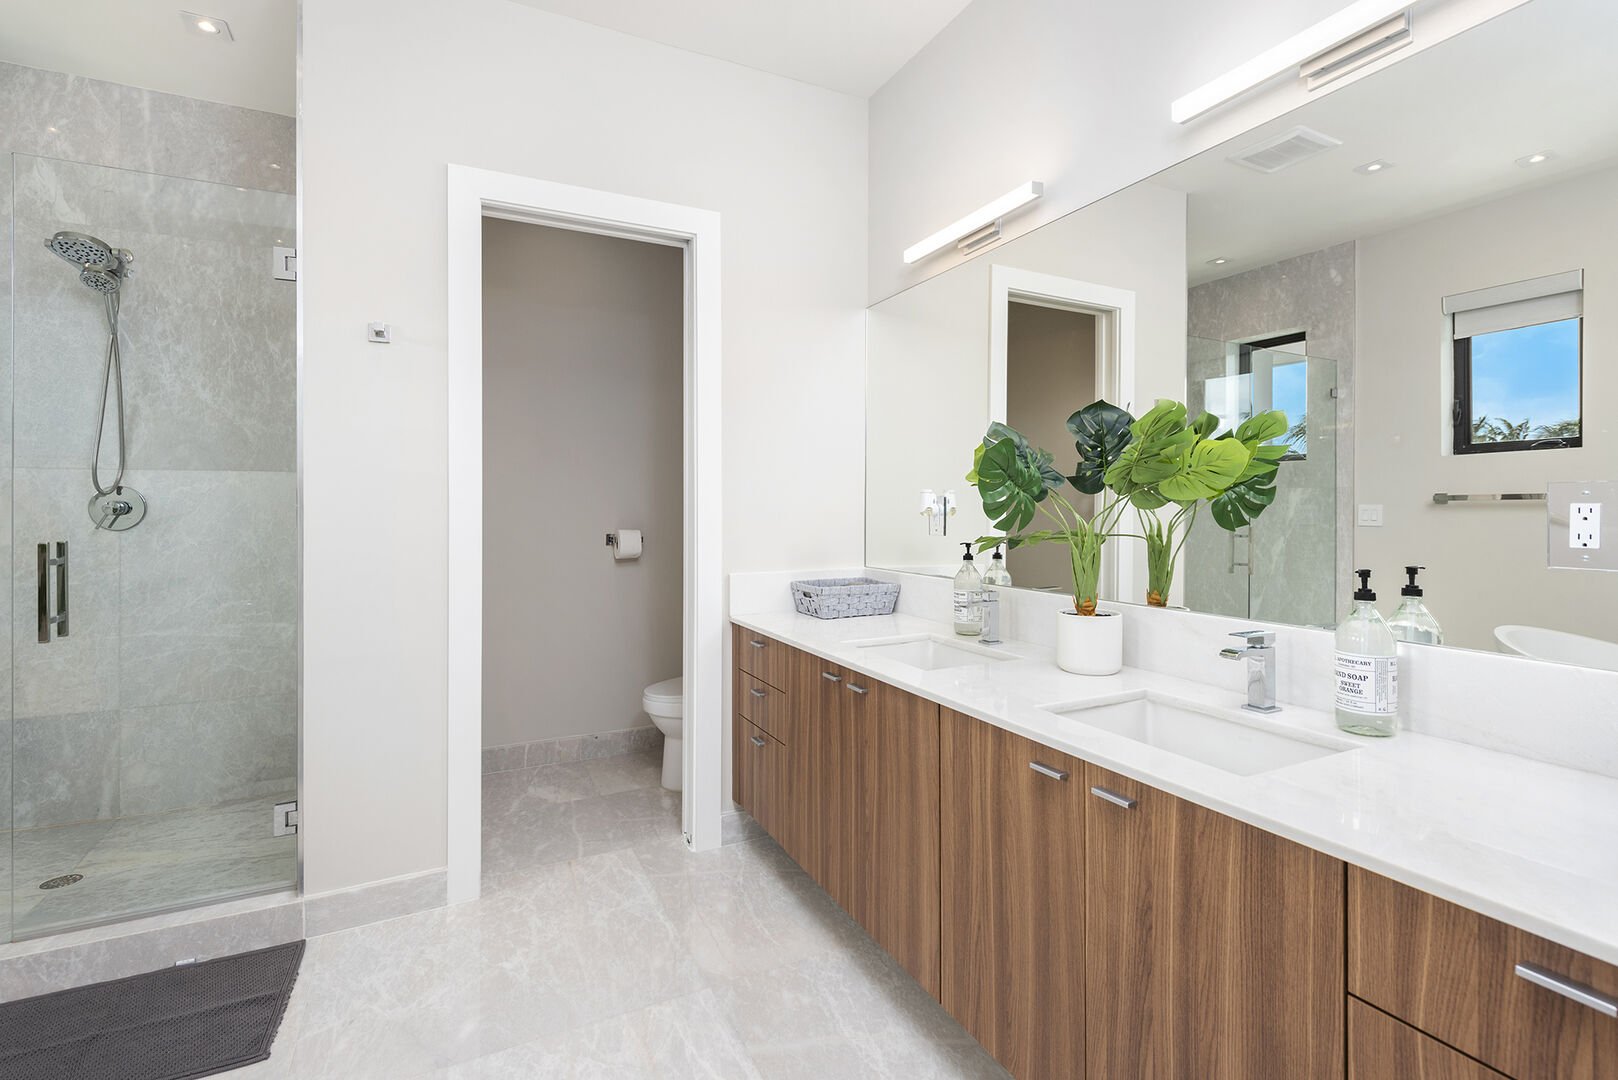 The primary bathroom features a walk-in shower, double sinks and a bathtub.